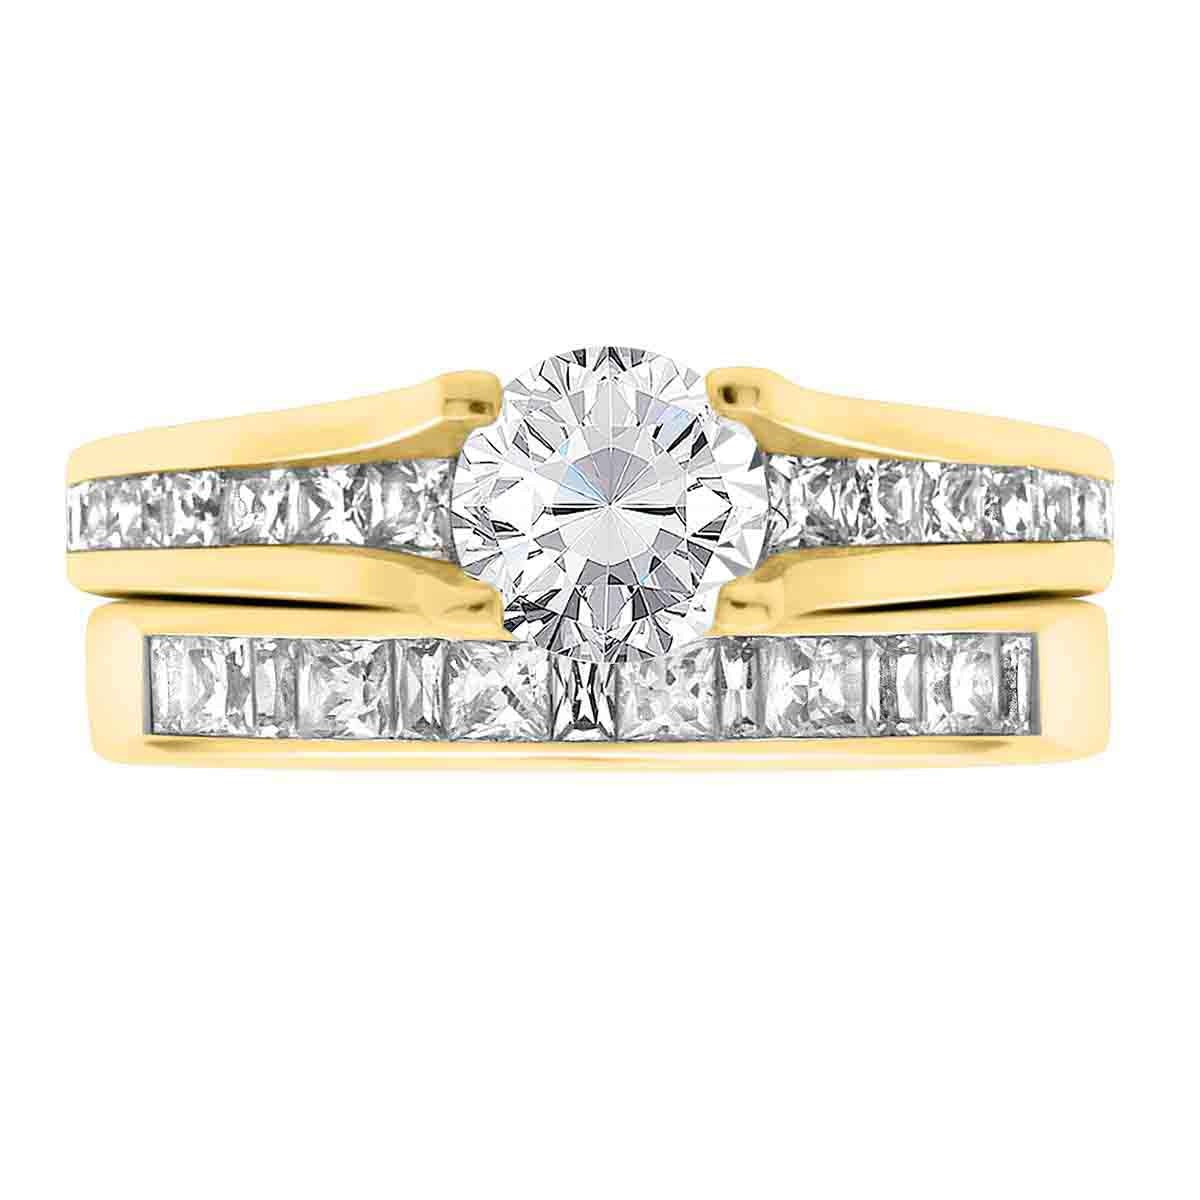 Channel Set Diamond Ring set in yellow gold with a diamond wedding ring